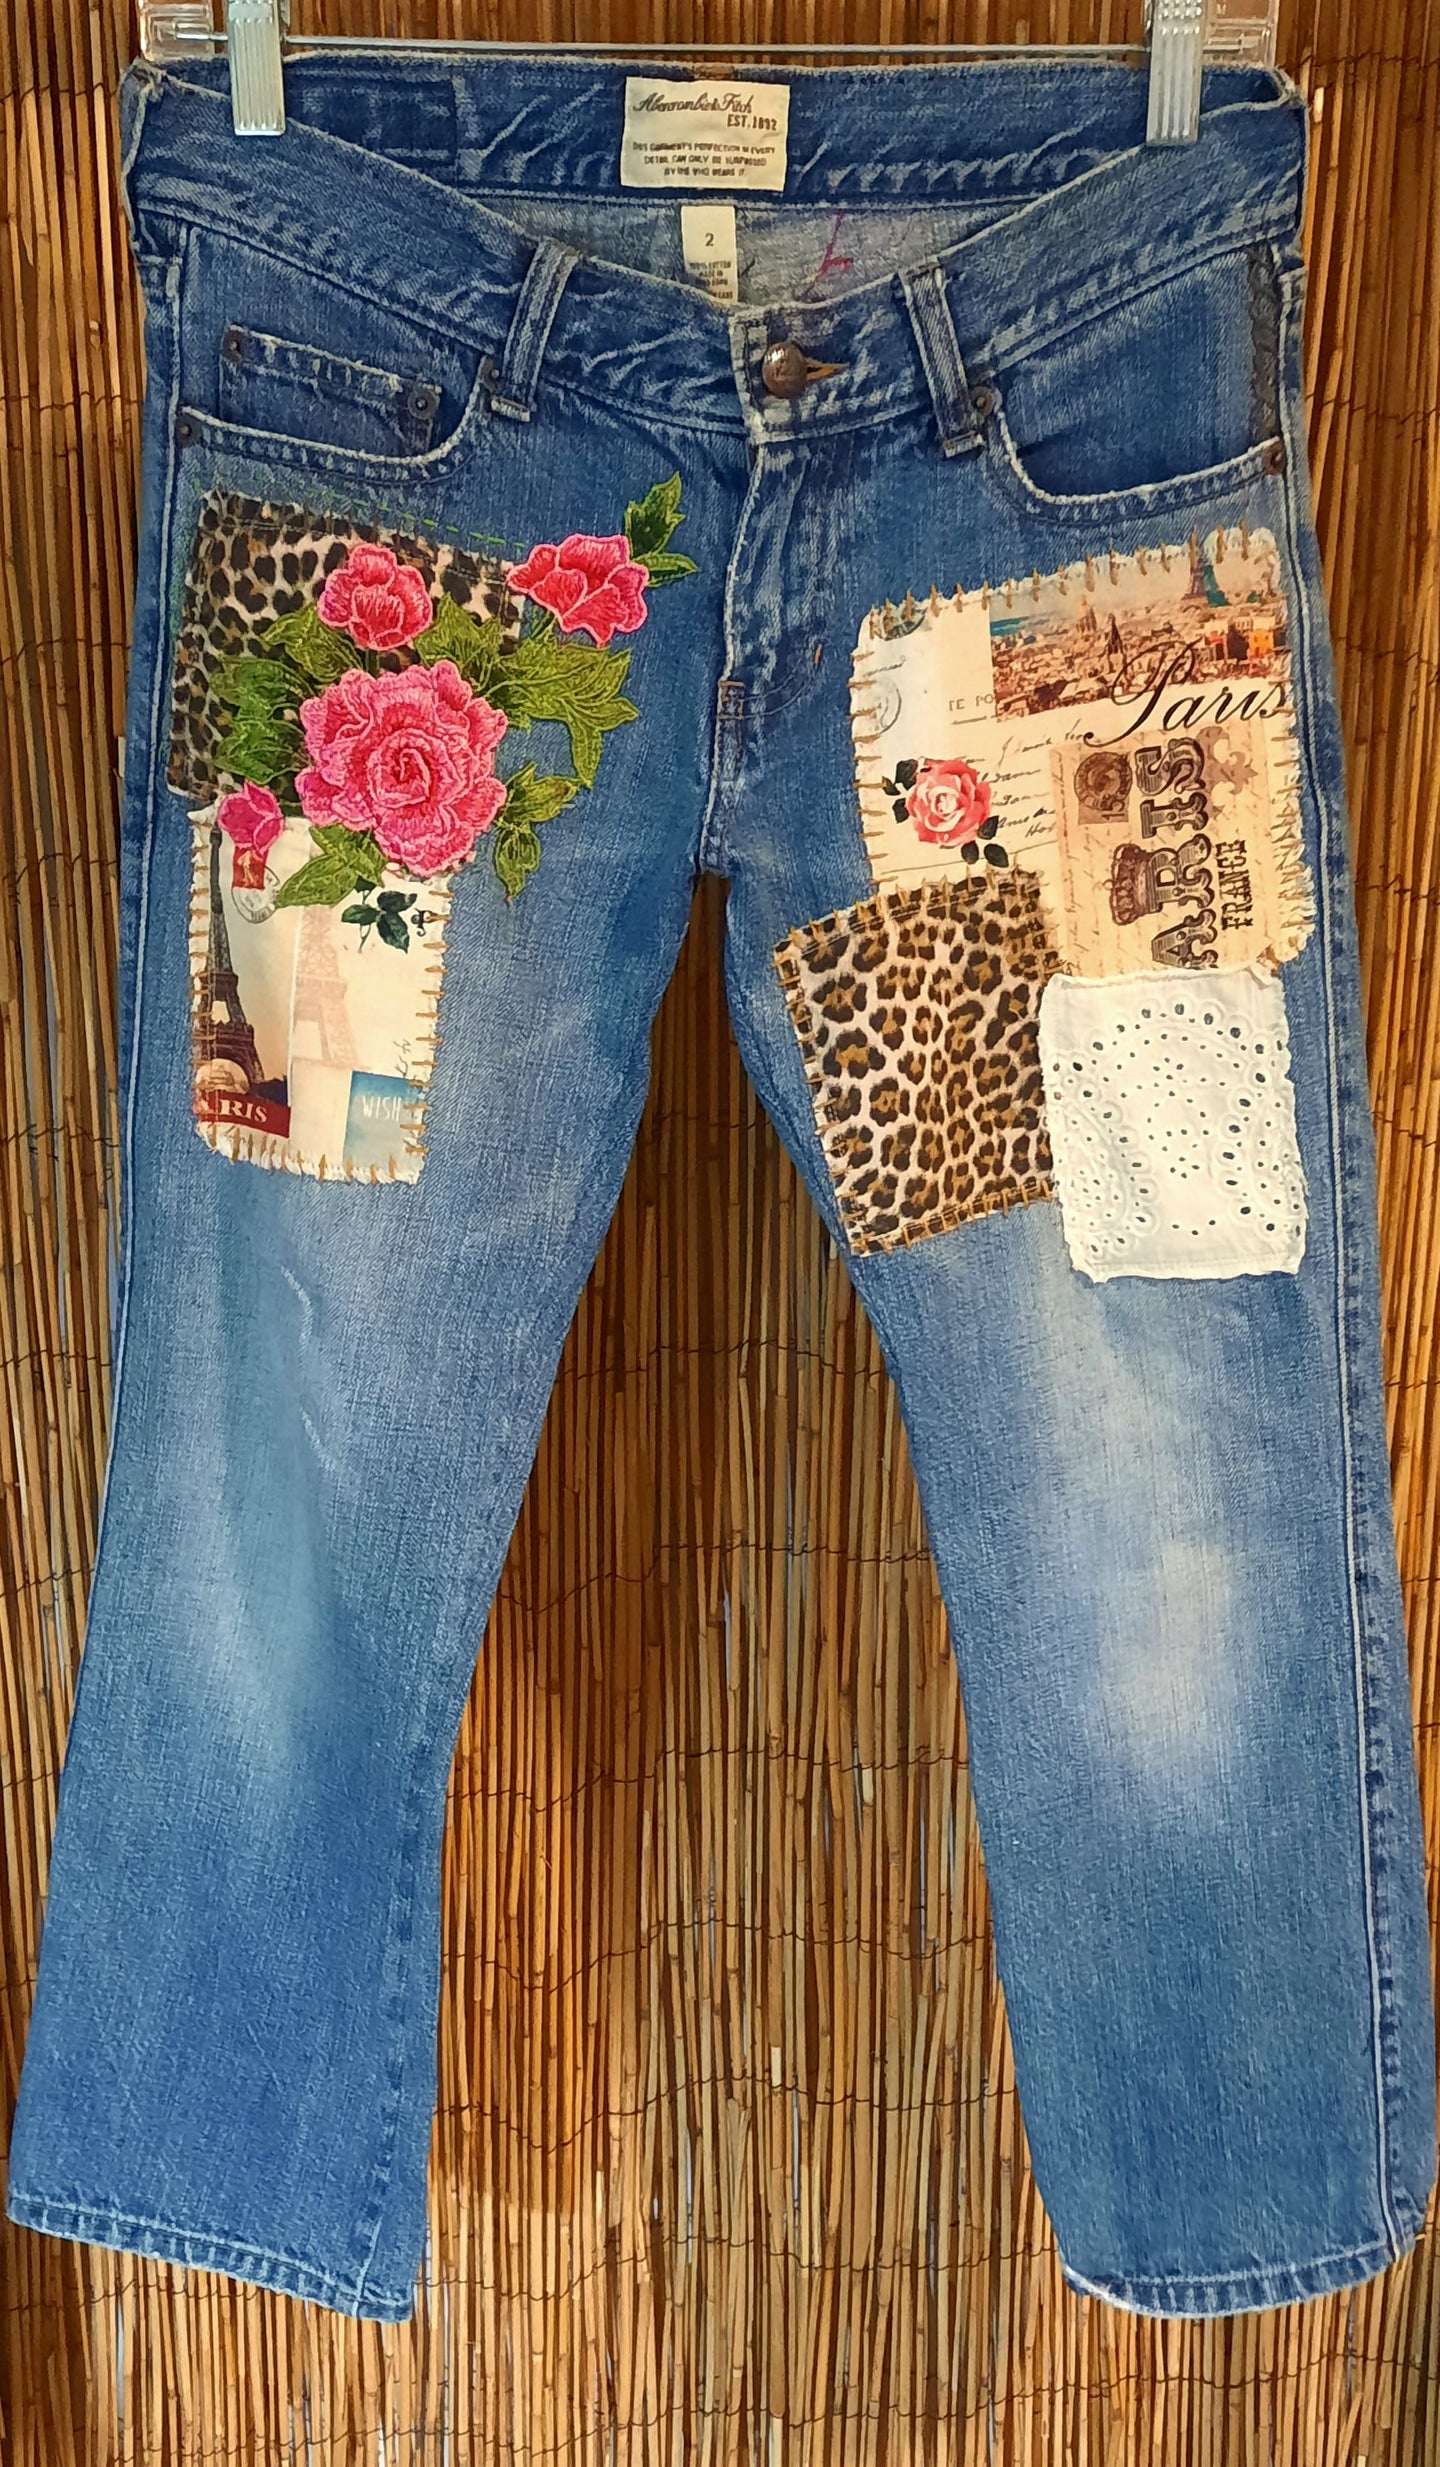 Upcycled/Repurposed Jeans/Ambercrombie Jeans/Patcwork Jeans